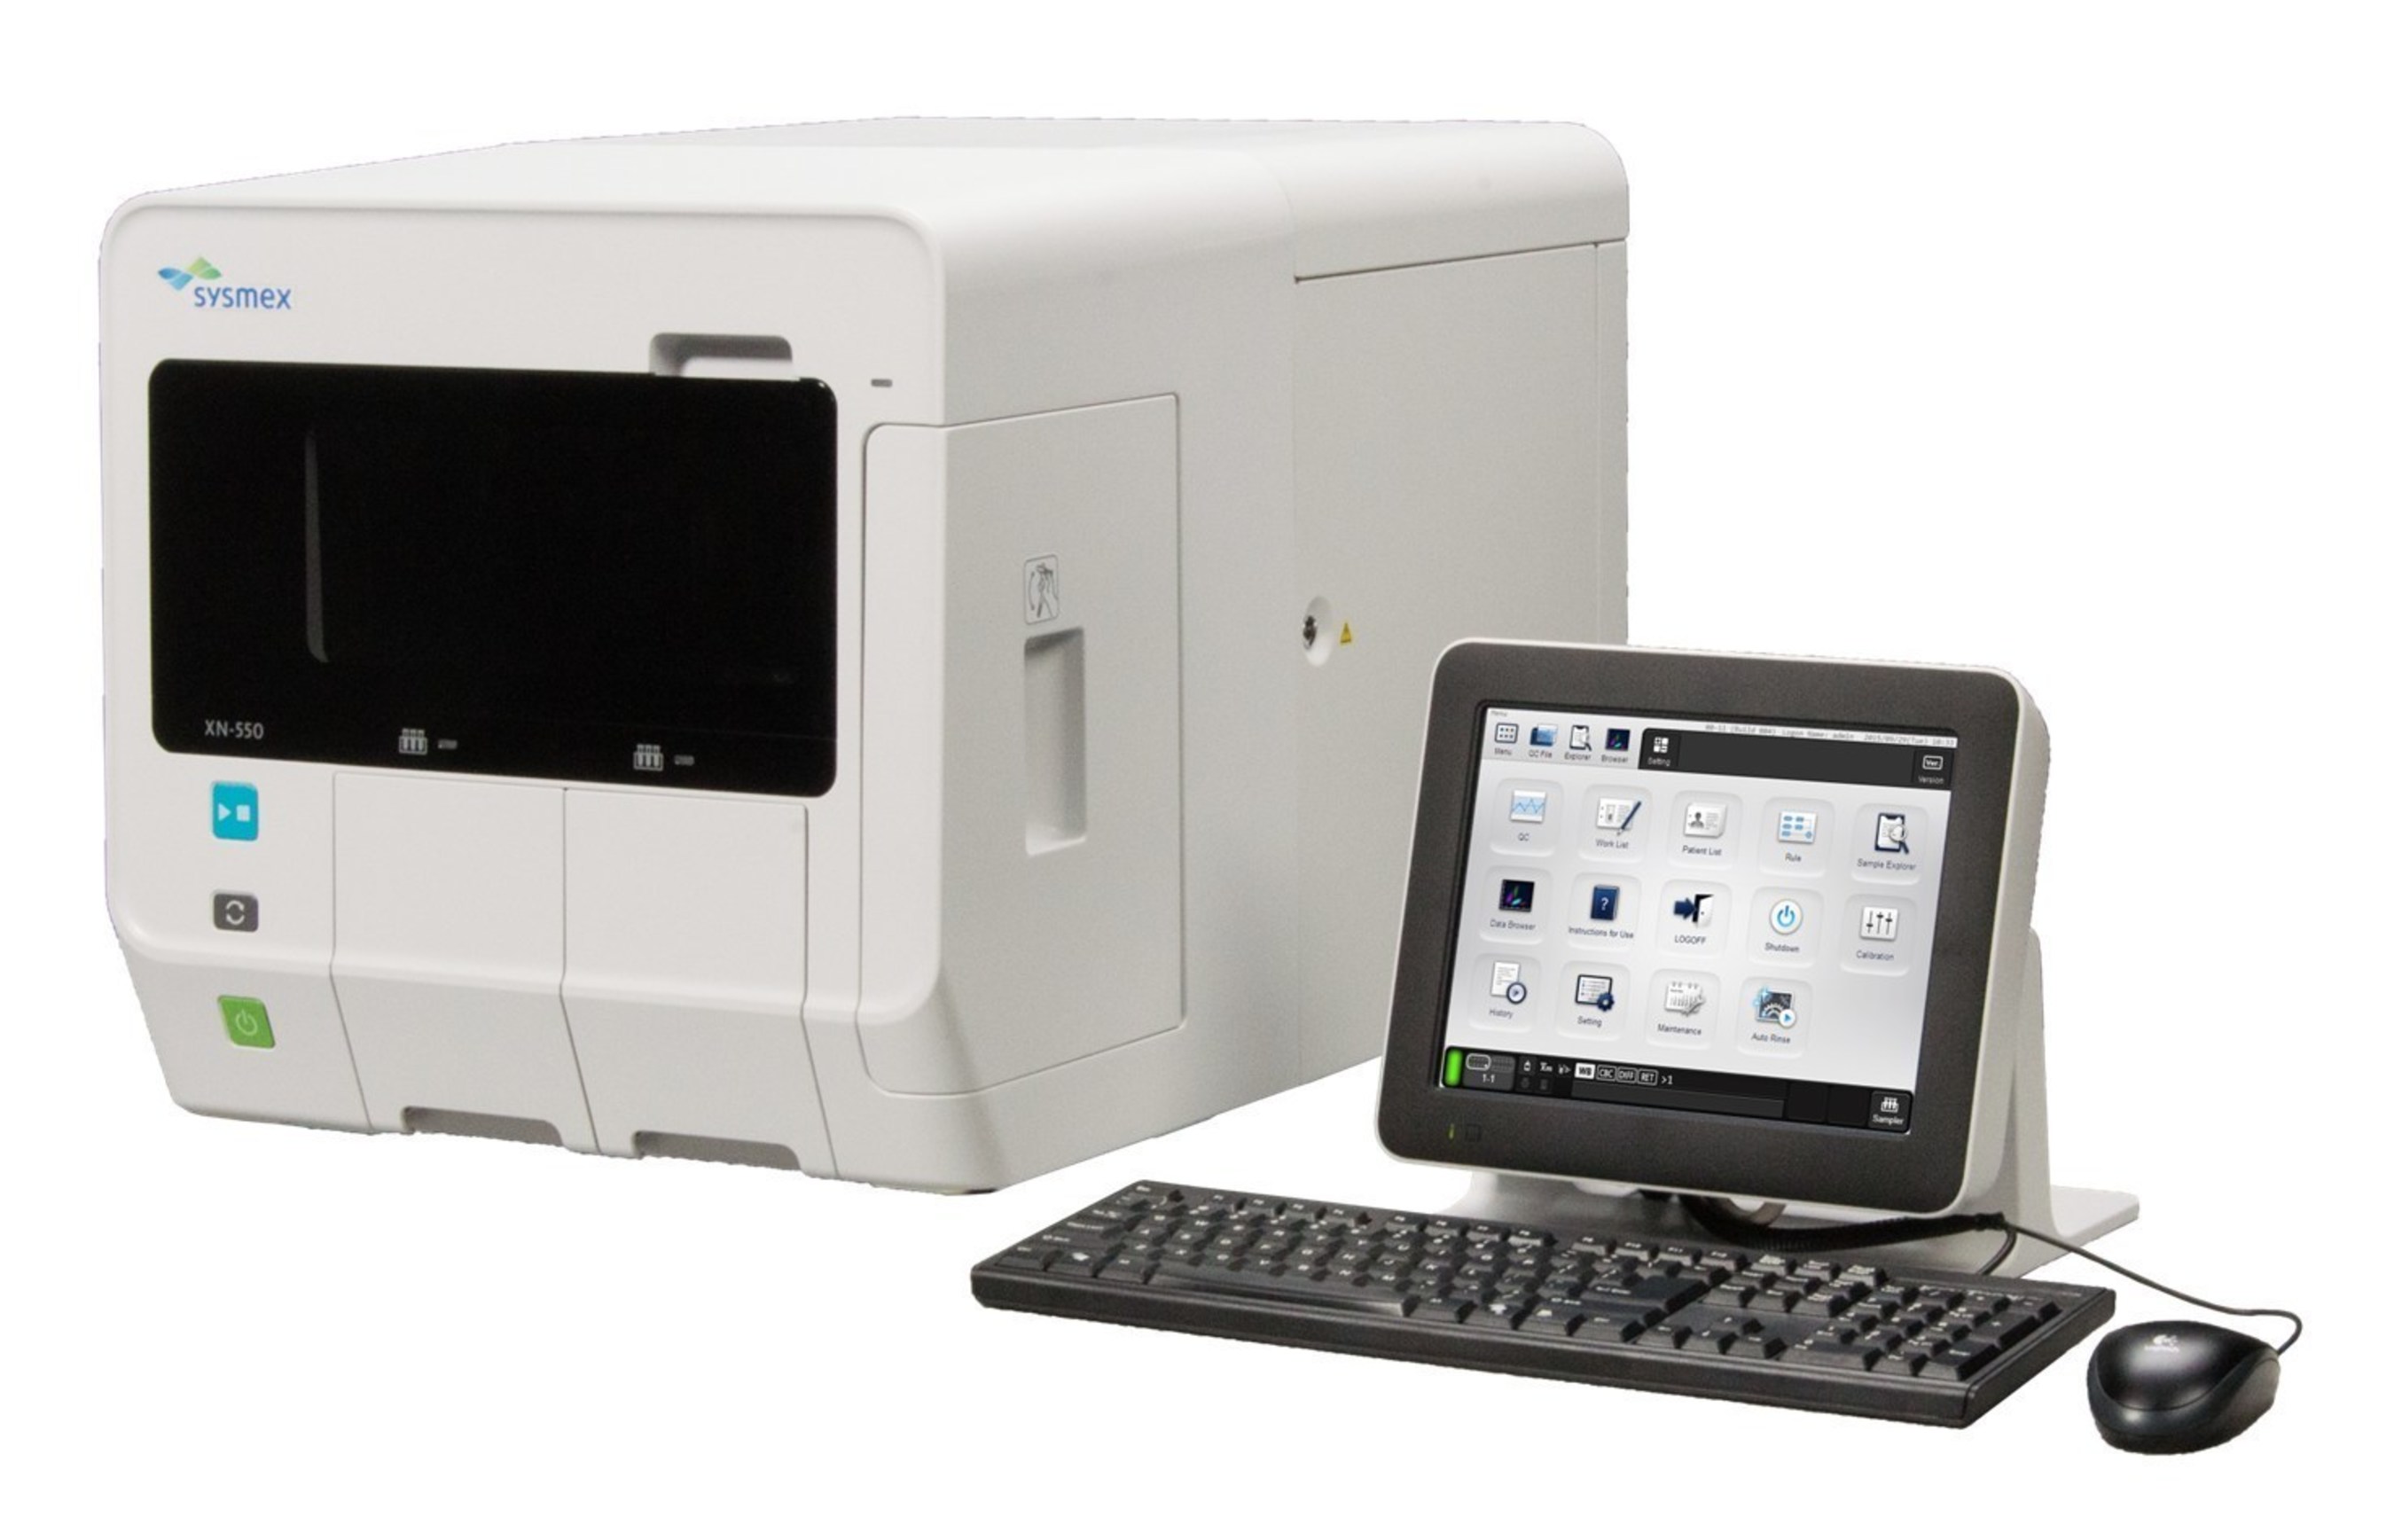 The Sysmex XN-L Series of hematology analyzers. (XN-550 shown here).